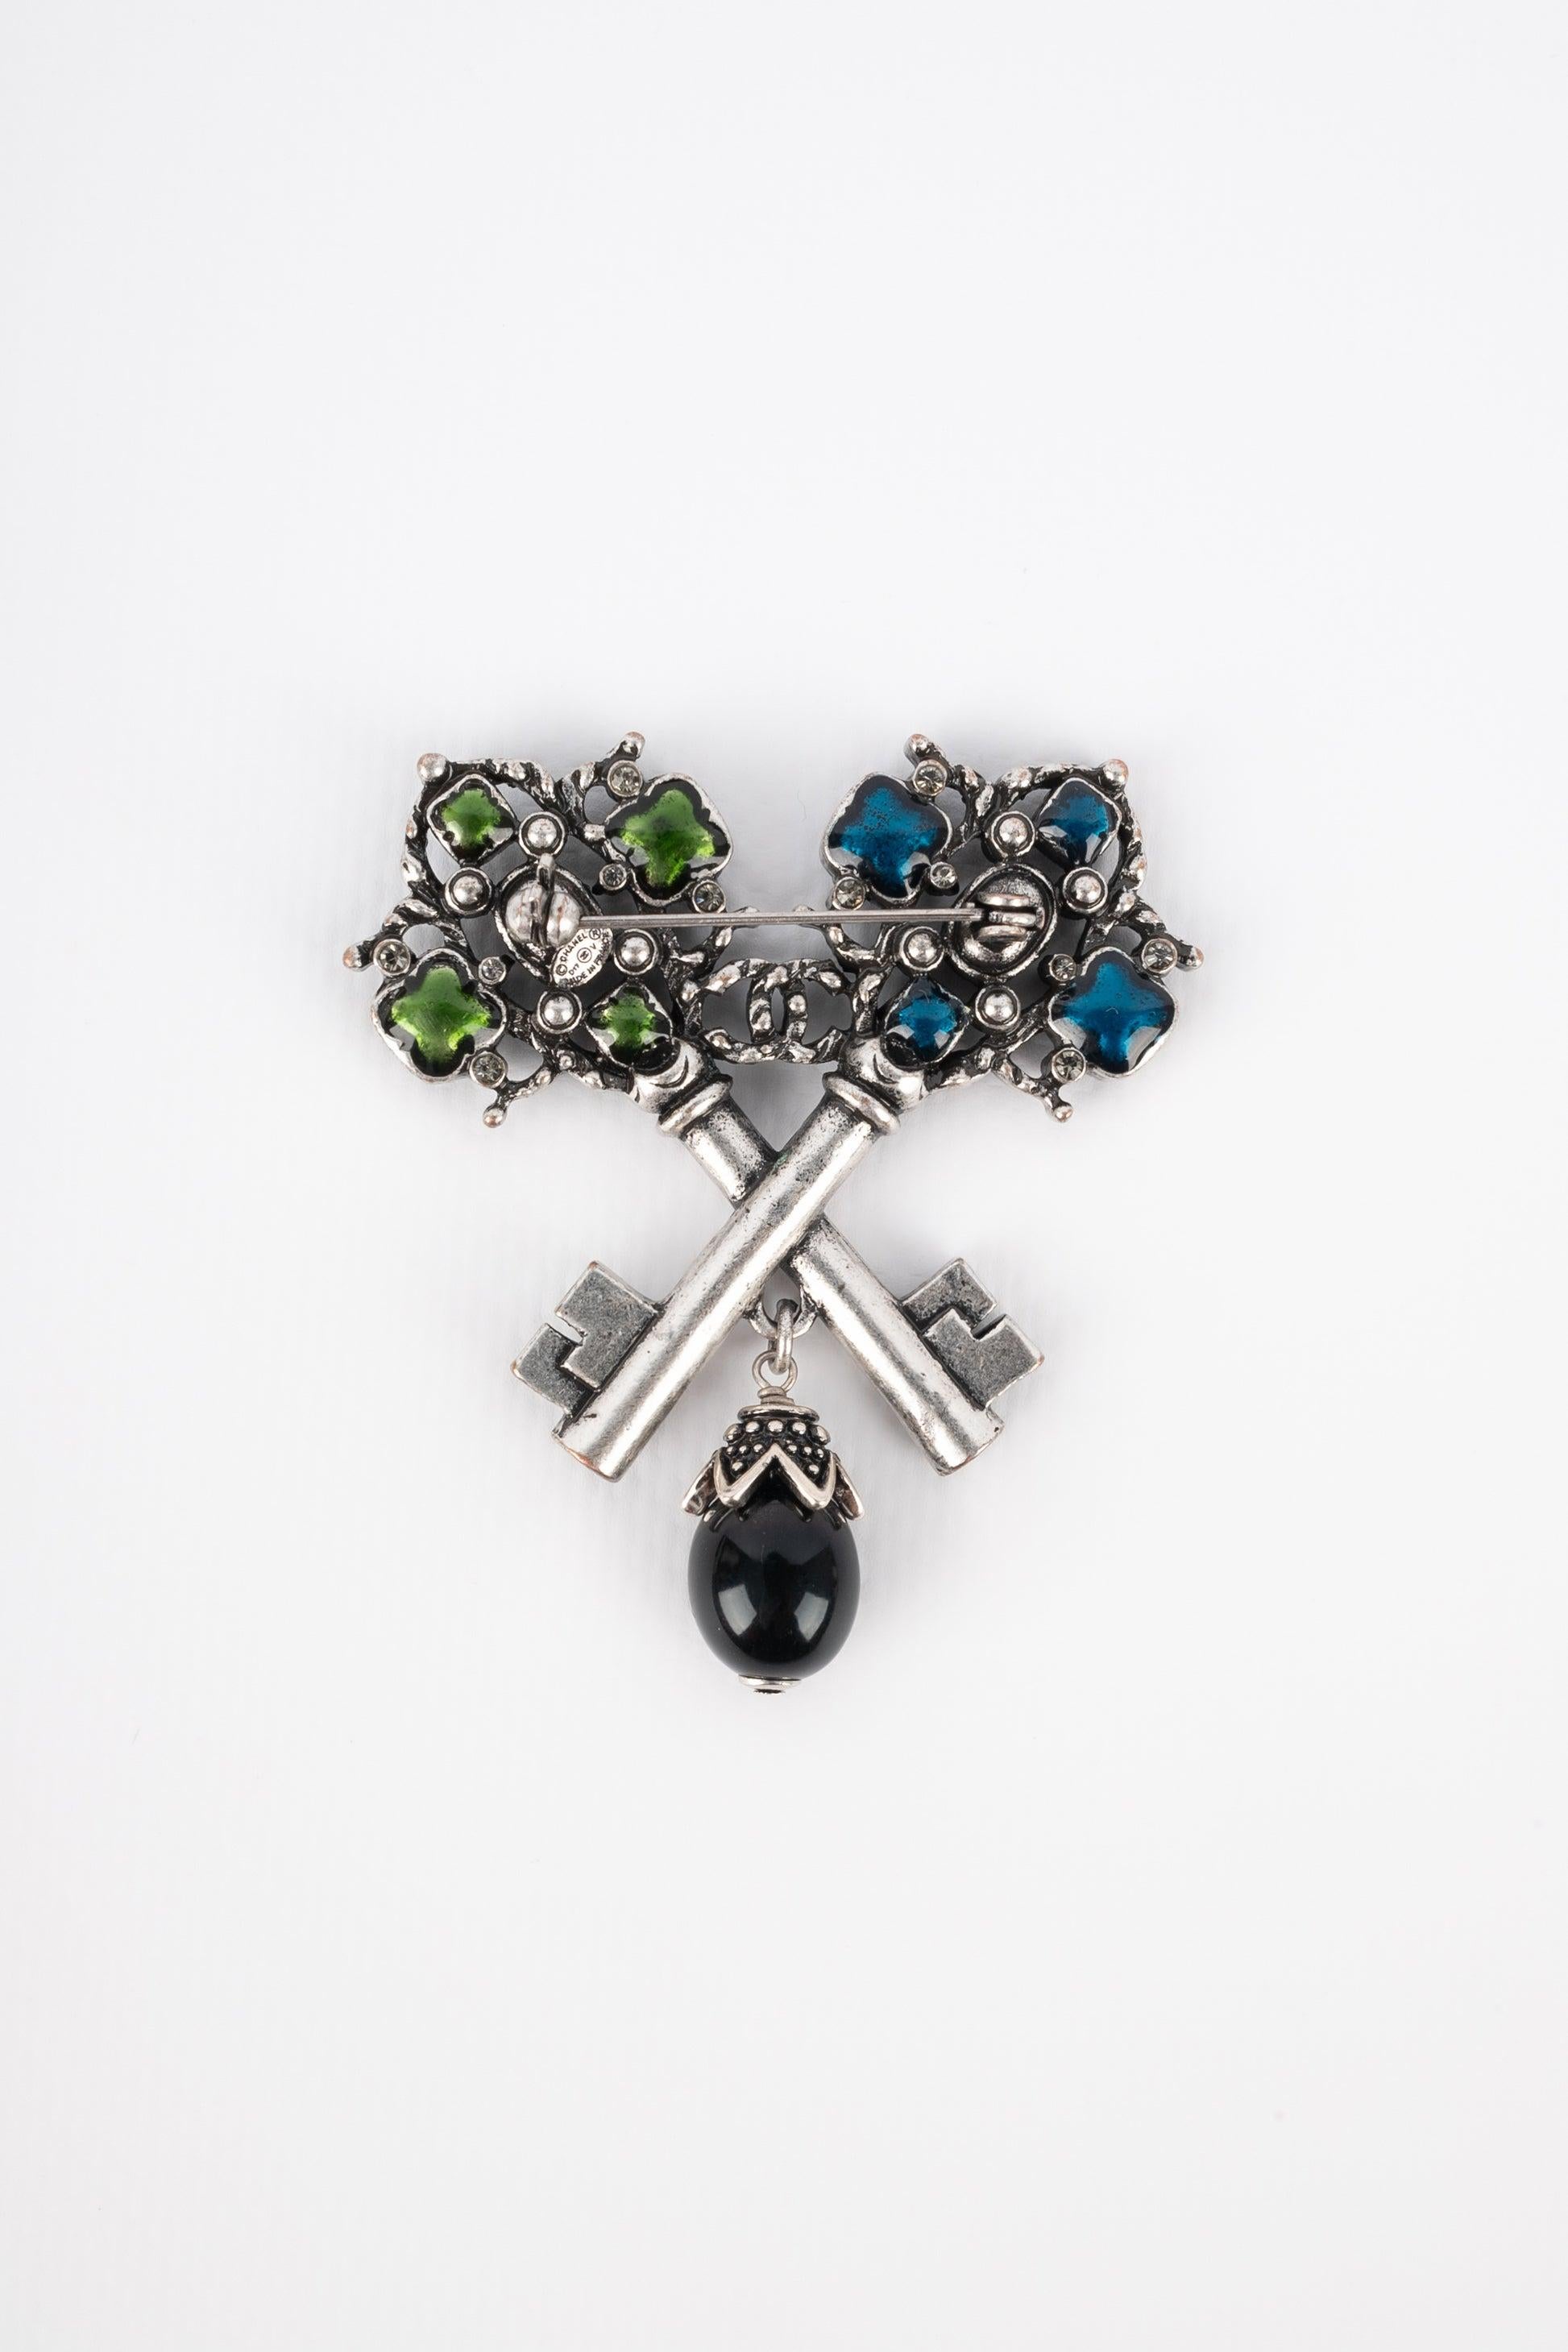 Chanel - (Made in France) Enameled silvery metal brooch representing two keys. 2017 Collection.

Additional information: 
Condition: Very good condition
Dimensions: 5.5 cm x 6 cm
Period: 21st Century
 
Seller Reference: BrB111
